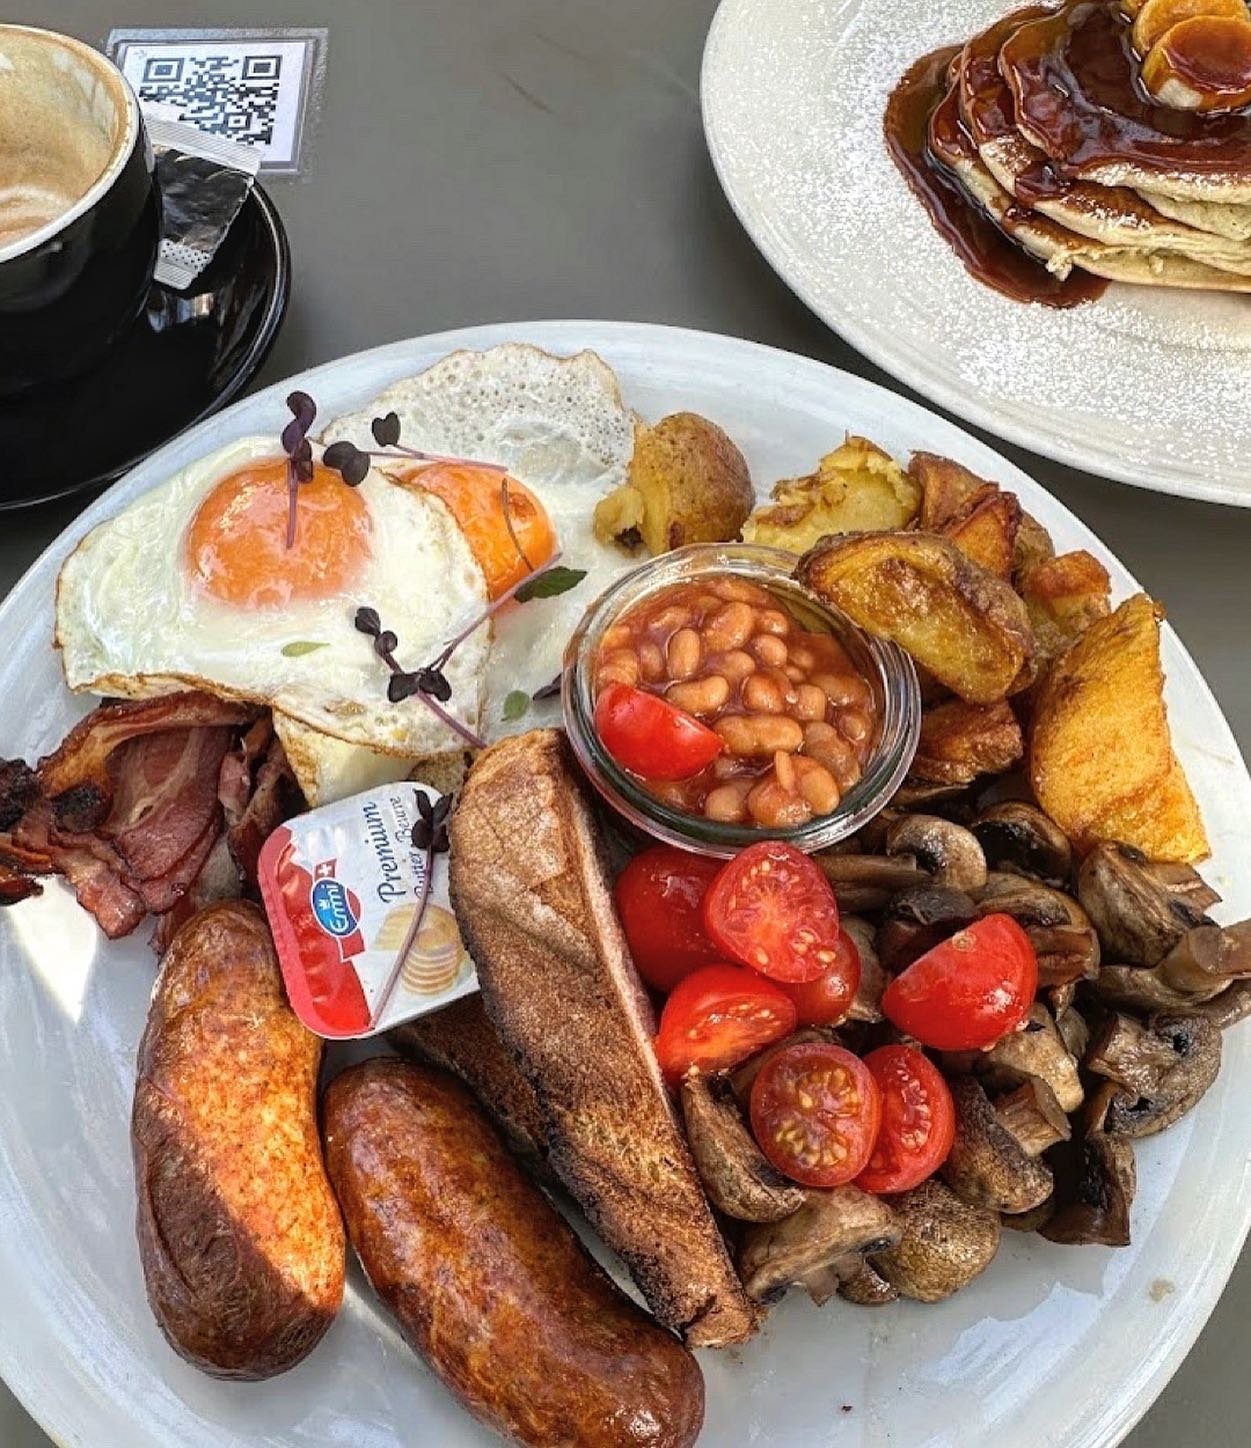 The best juicy full english only at Fork &amp; Bottle!
.
.
.
.

#brunch #breakfast #food #foodie #foodporn #lunch #instafood #coffee #foodphotography #foodstagram #yummy #dinner #delicious #brunchtime #foodblogger #cafe #healthyfood #brunch #forkandb